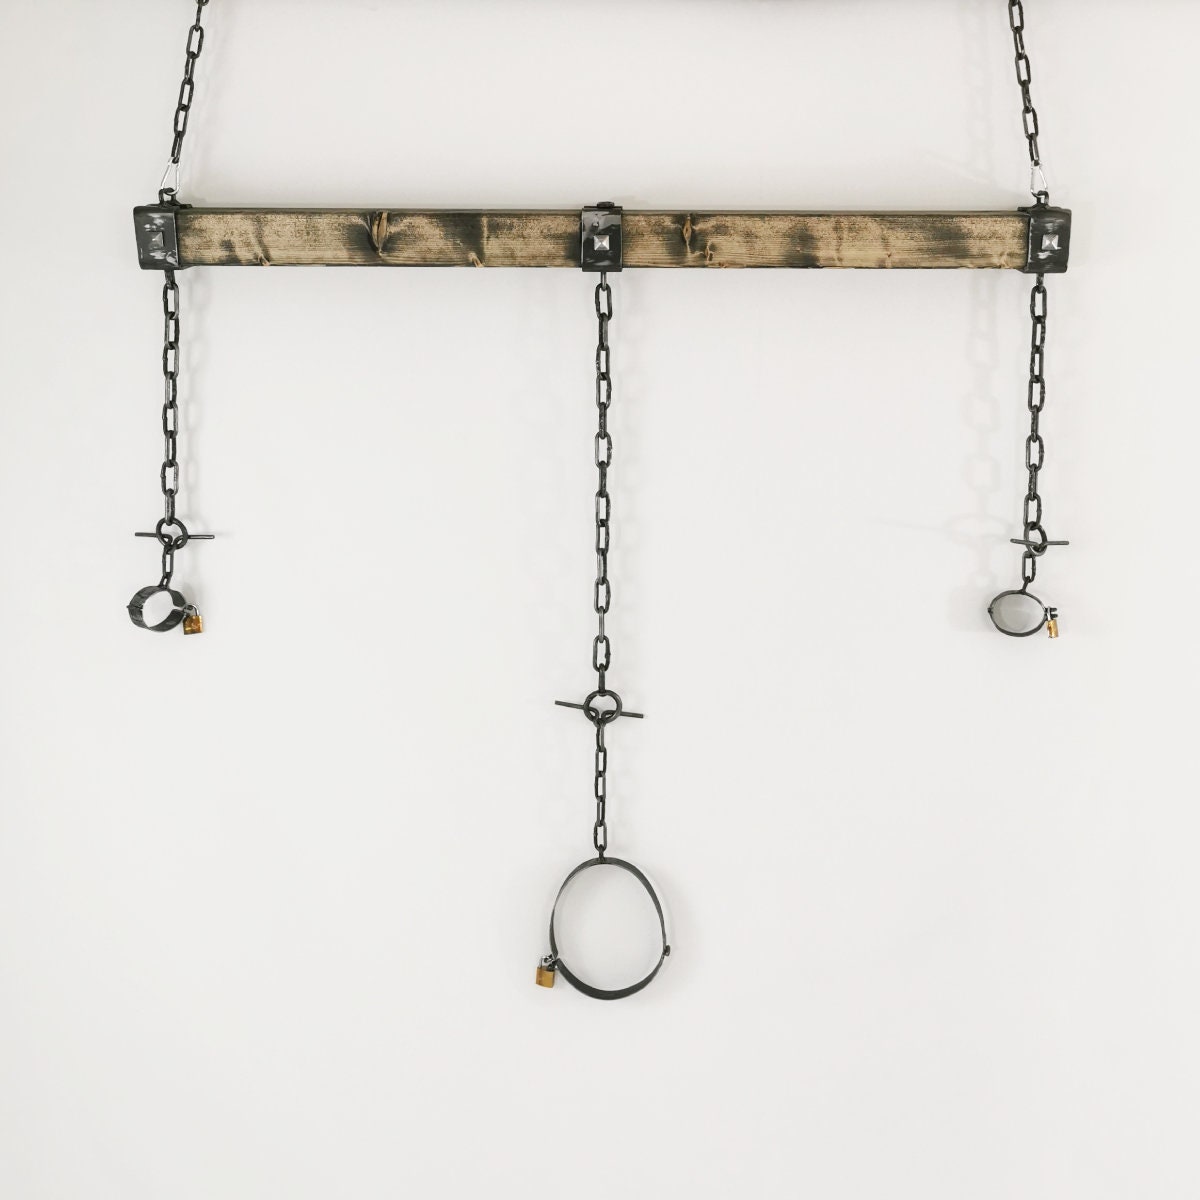 Wooden Bdsm Spreader Bar With Metal Handcuffs And Collar Etsy